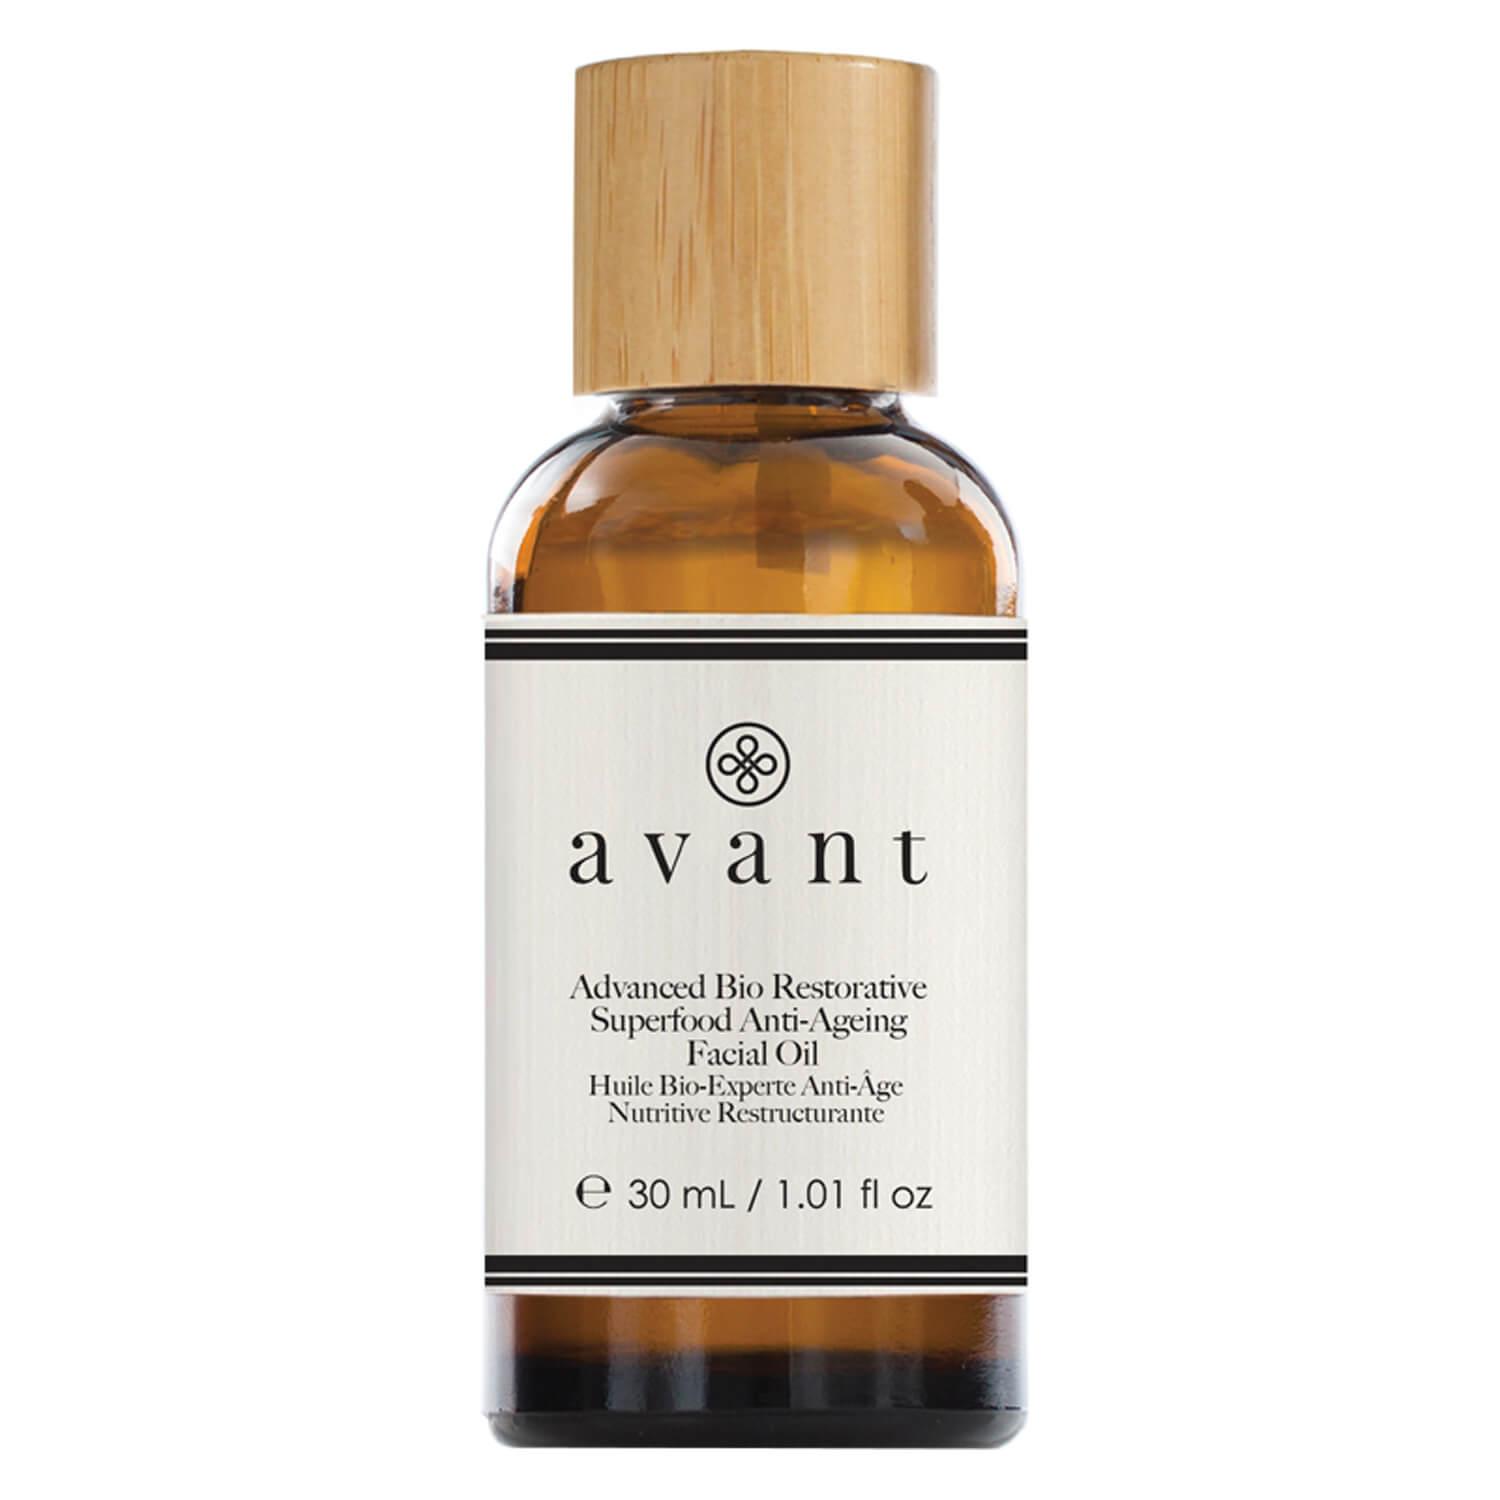 avant - Advanced Bio Restorative Superfood Facial Oil (Anti-Ageing) Limited Edition